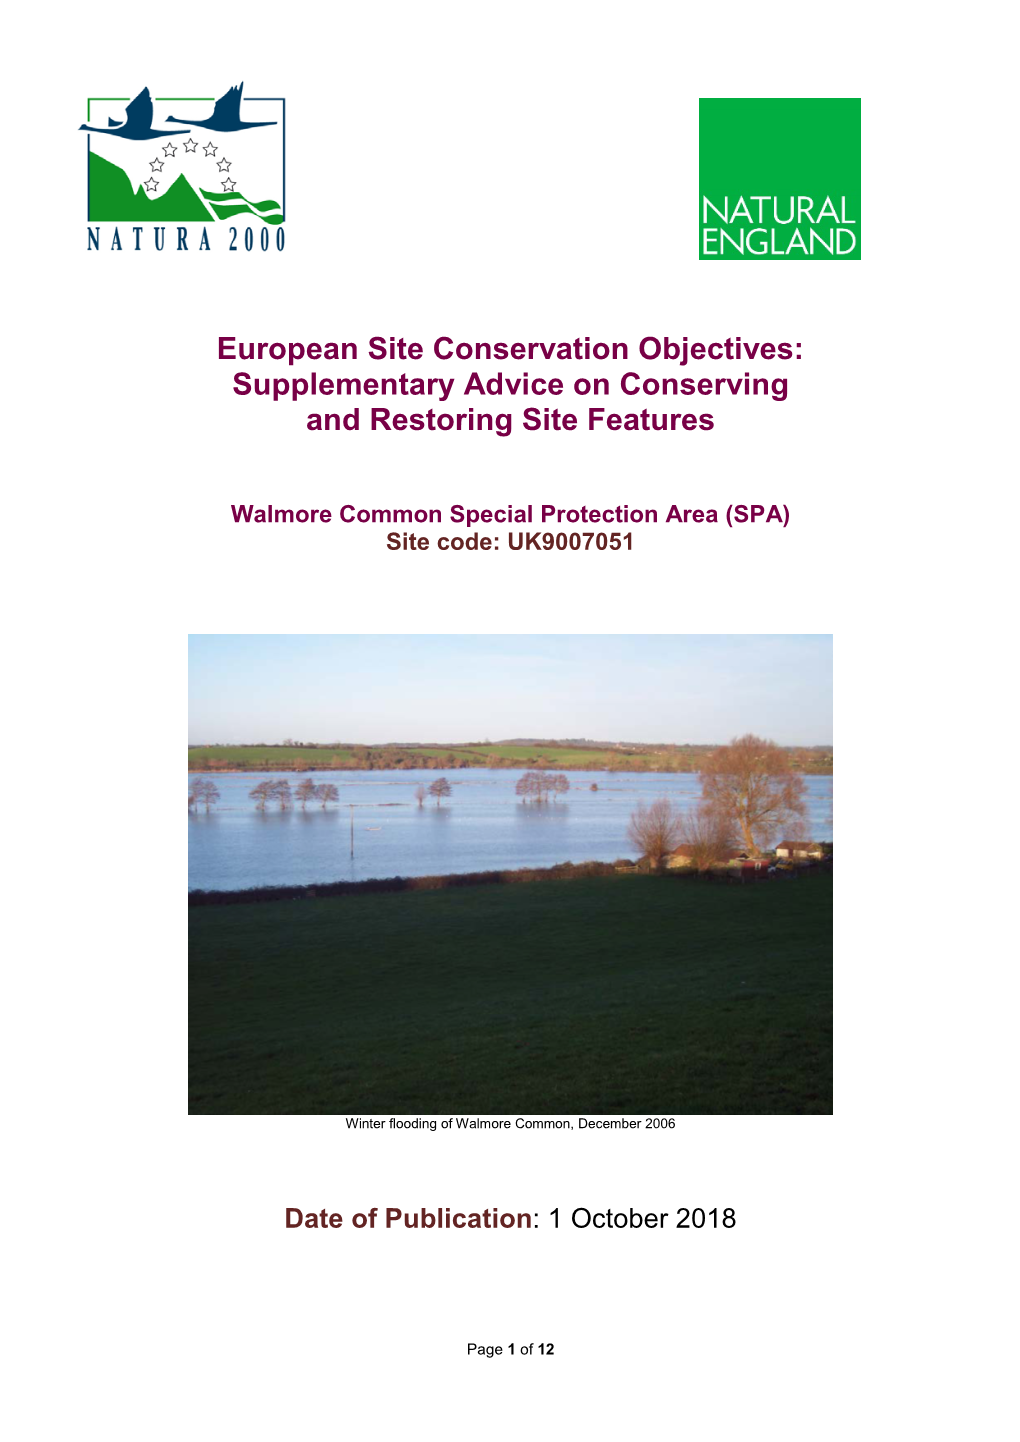 Walmore Common SPA Conservation Objectives Supplemenary